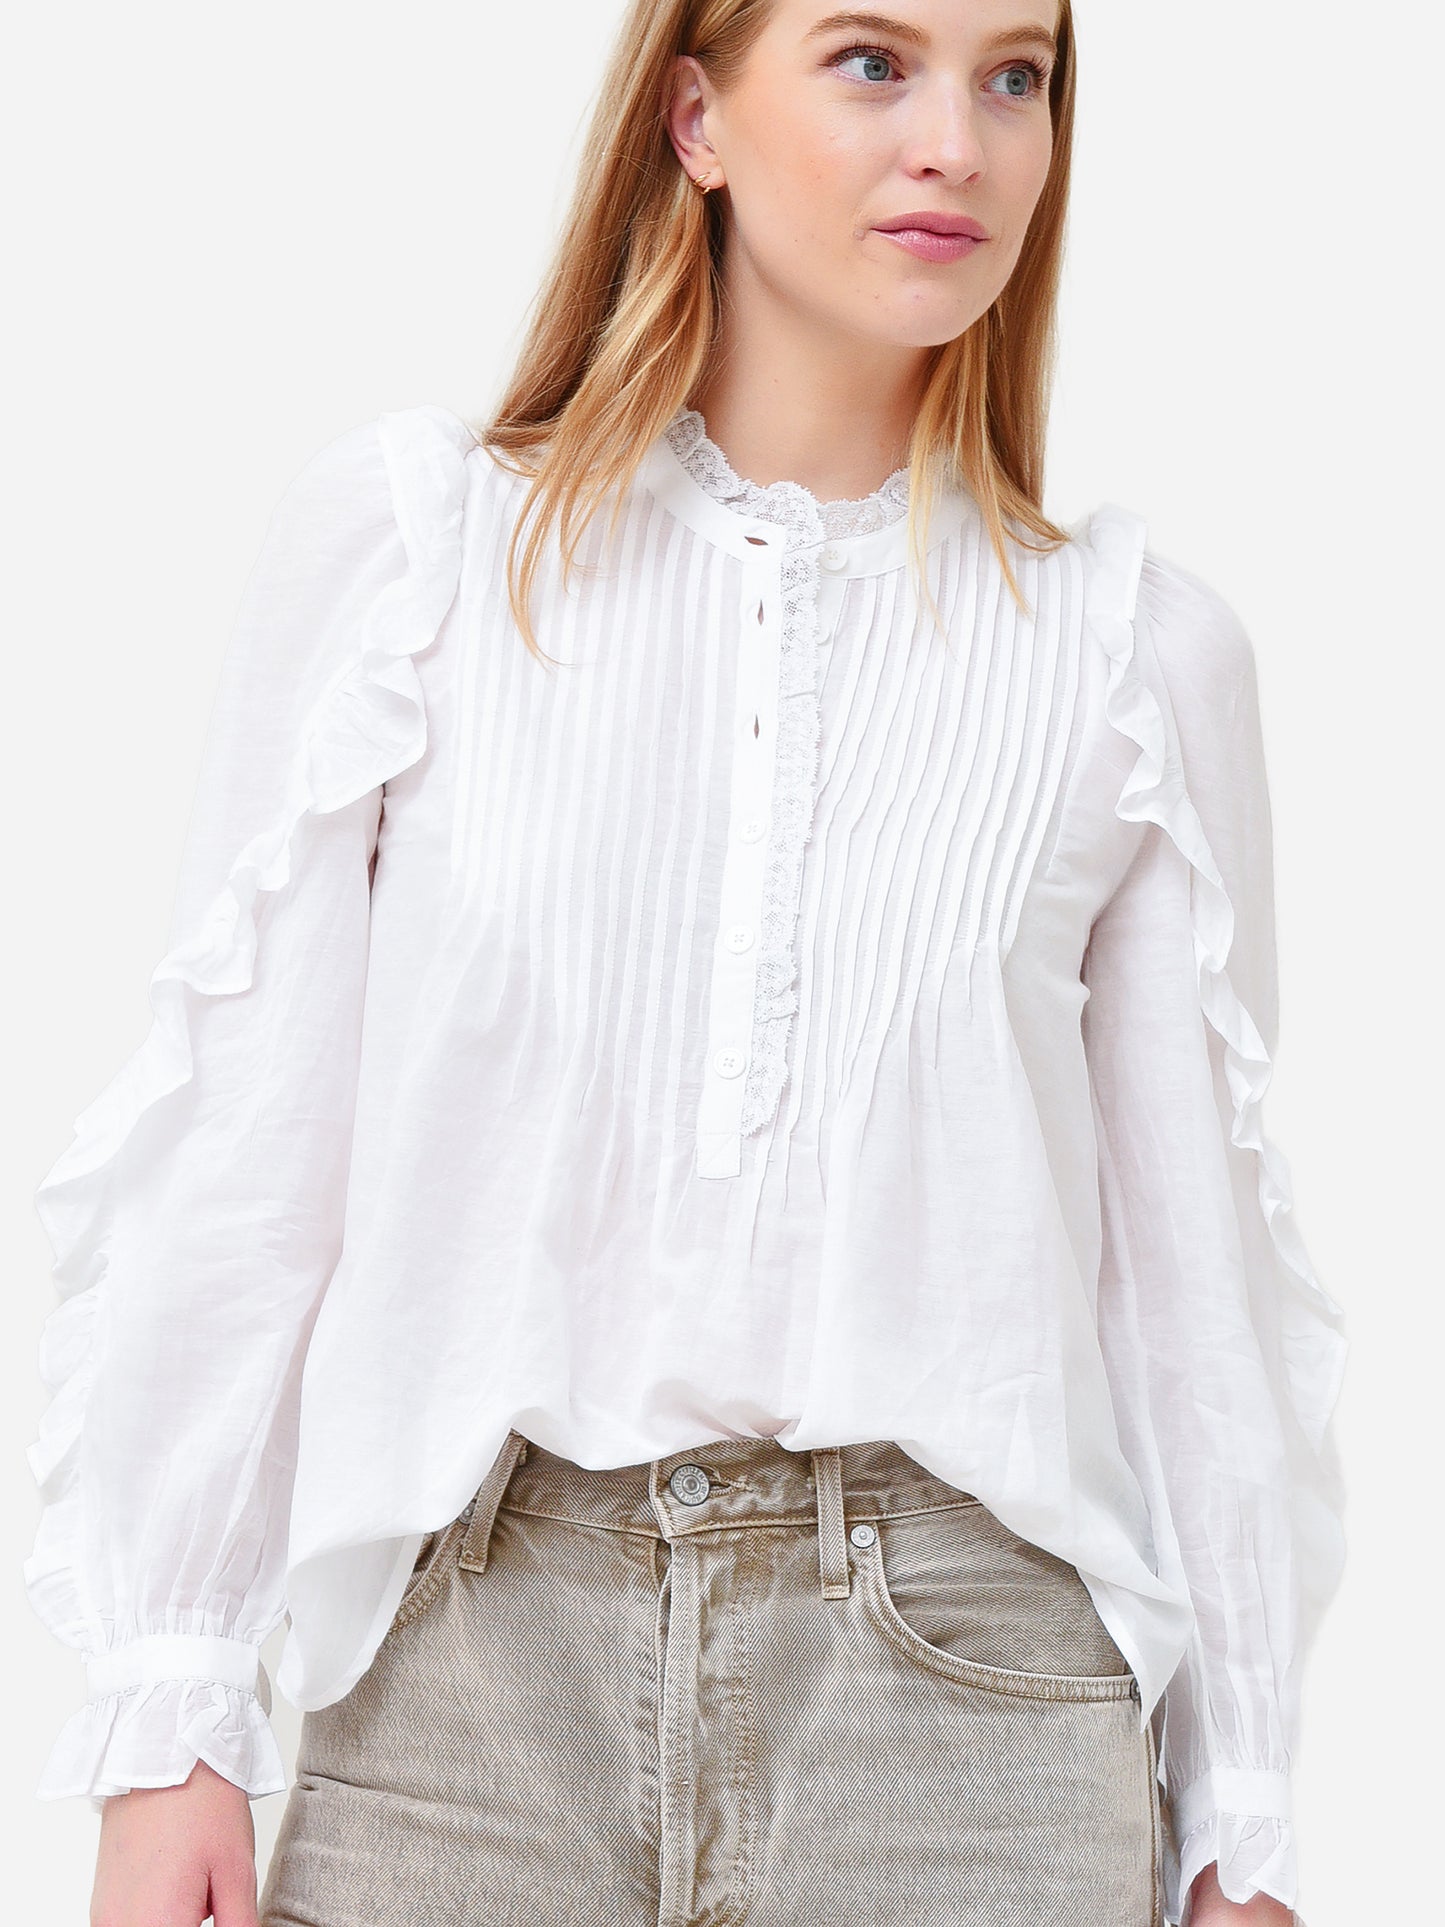 Zadig & Voltaire Women's Timmy Tomboy Blouse